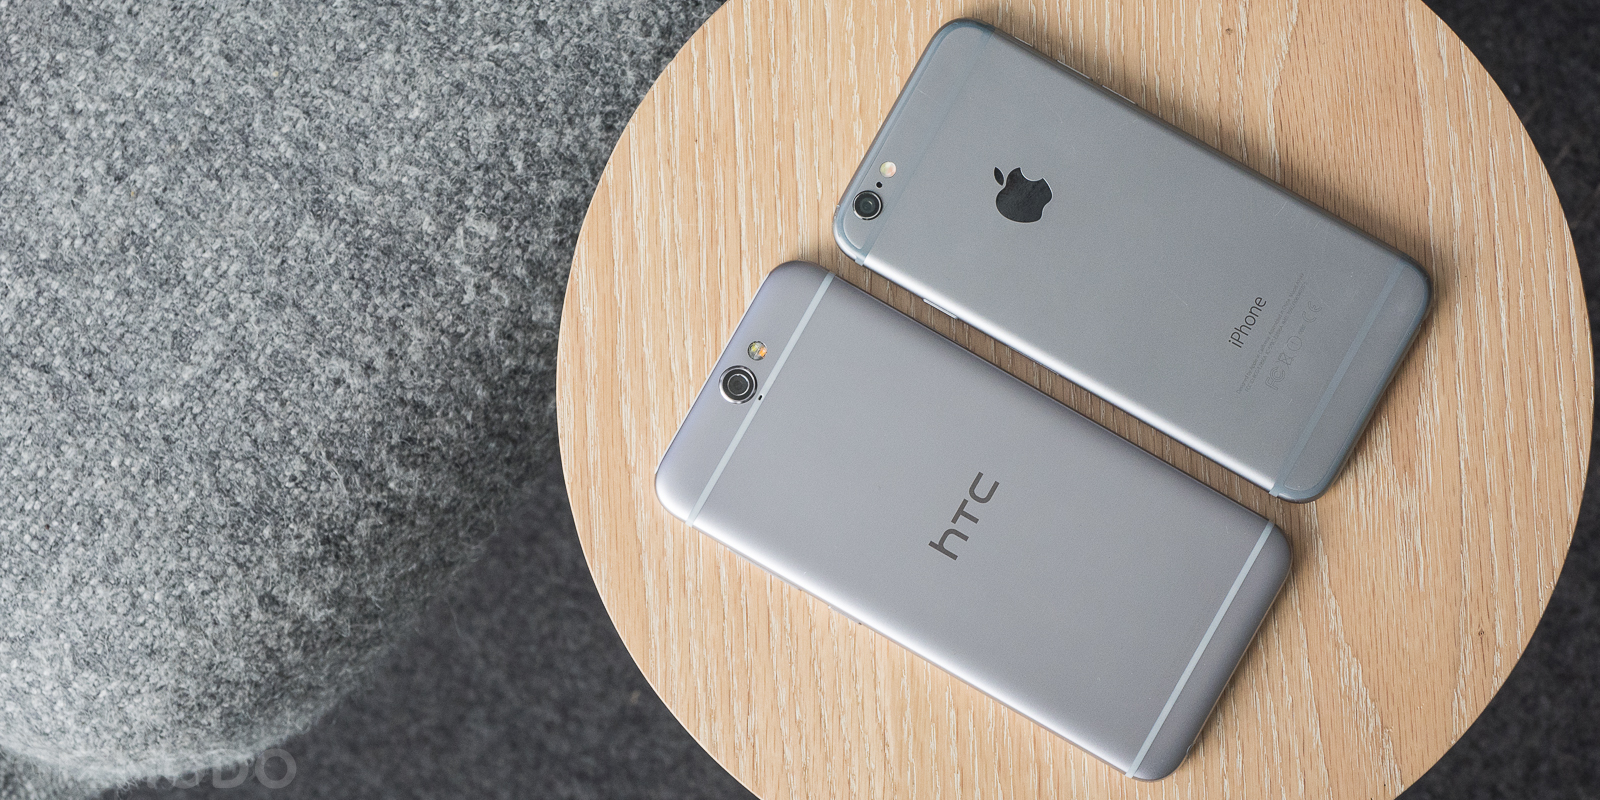 HTC's One A9 is a $399 iPhone running Android 6.0 - The Verge